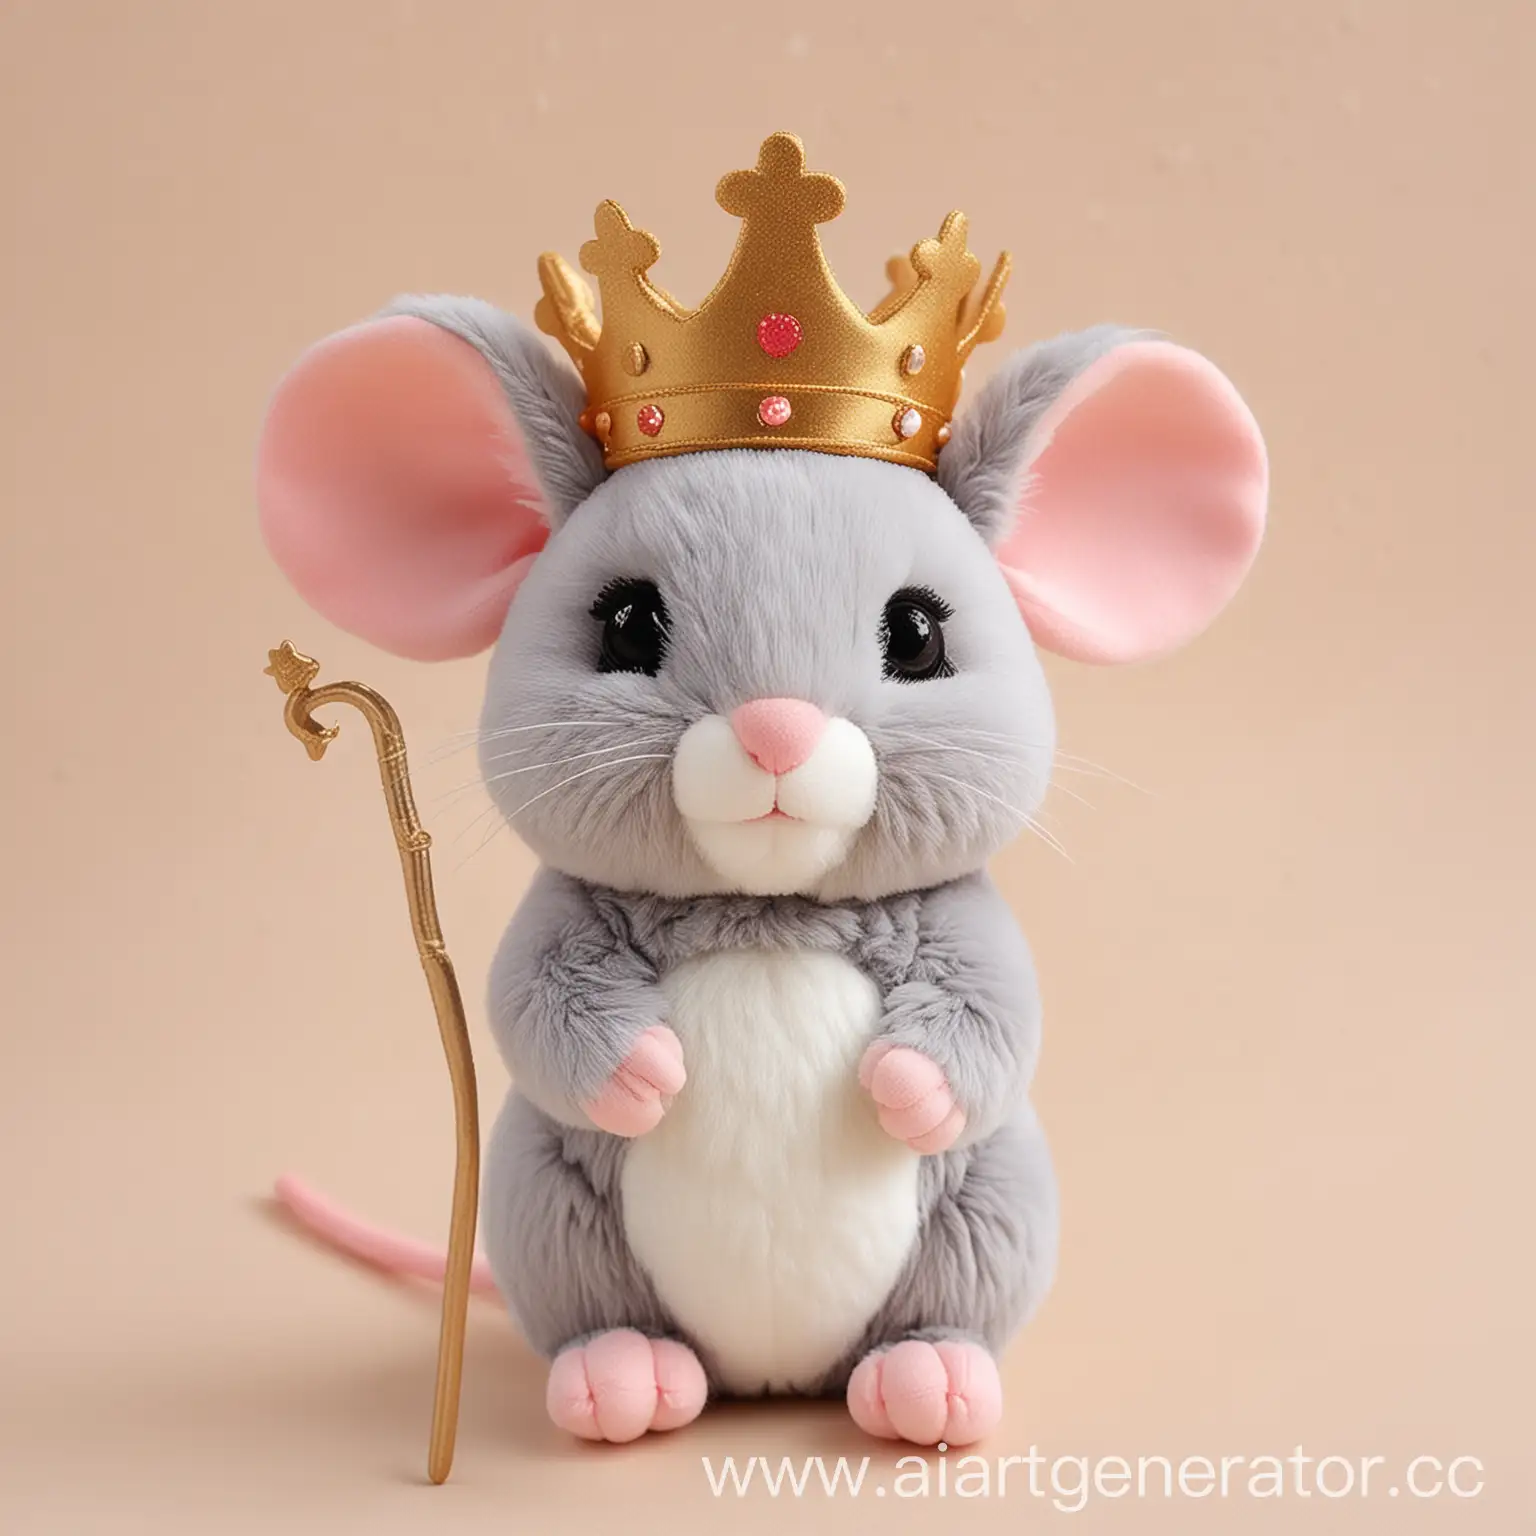 Cute mouse with crown and magic wand plush toy